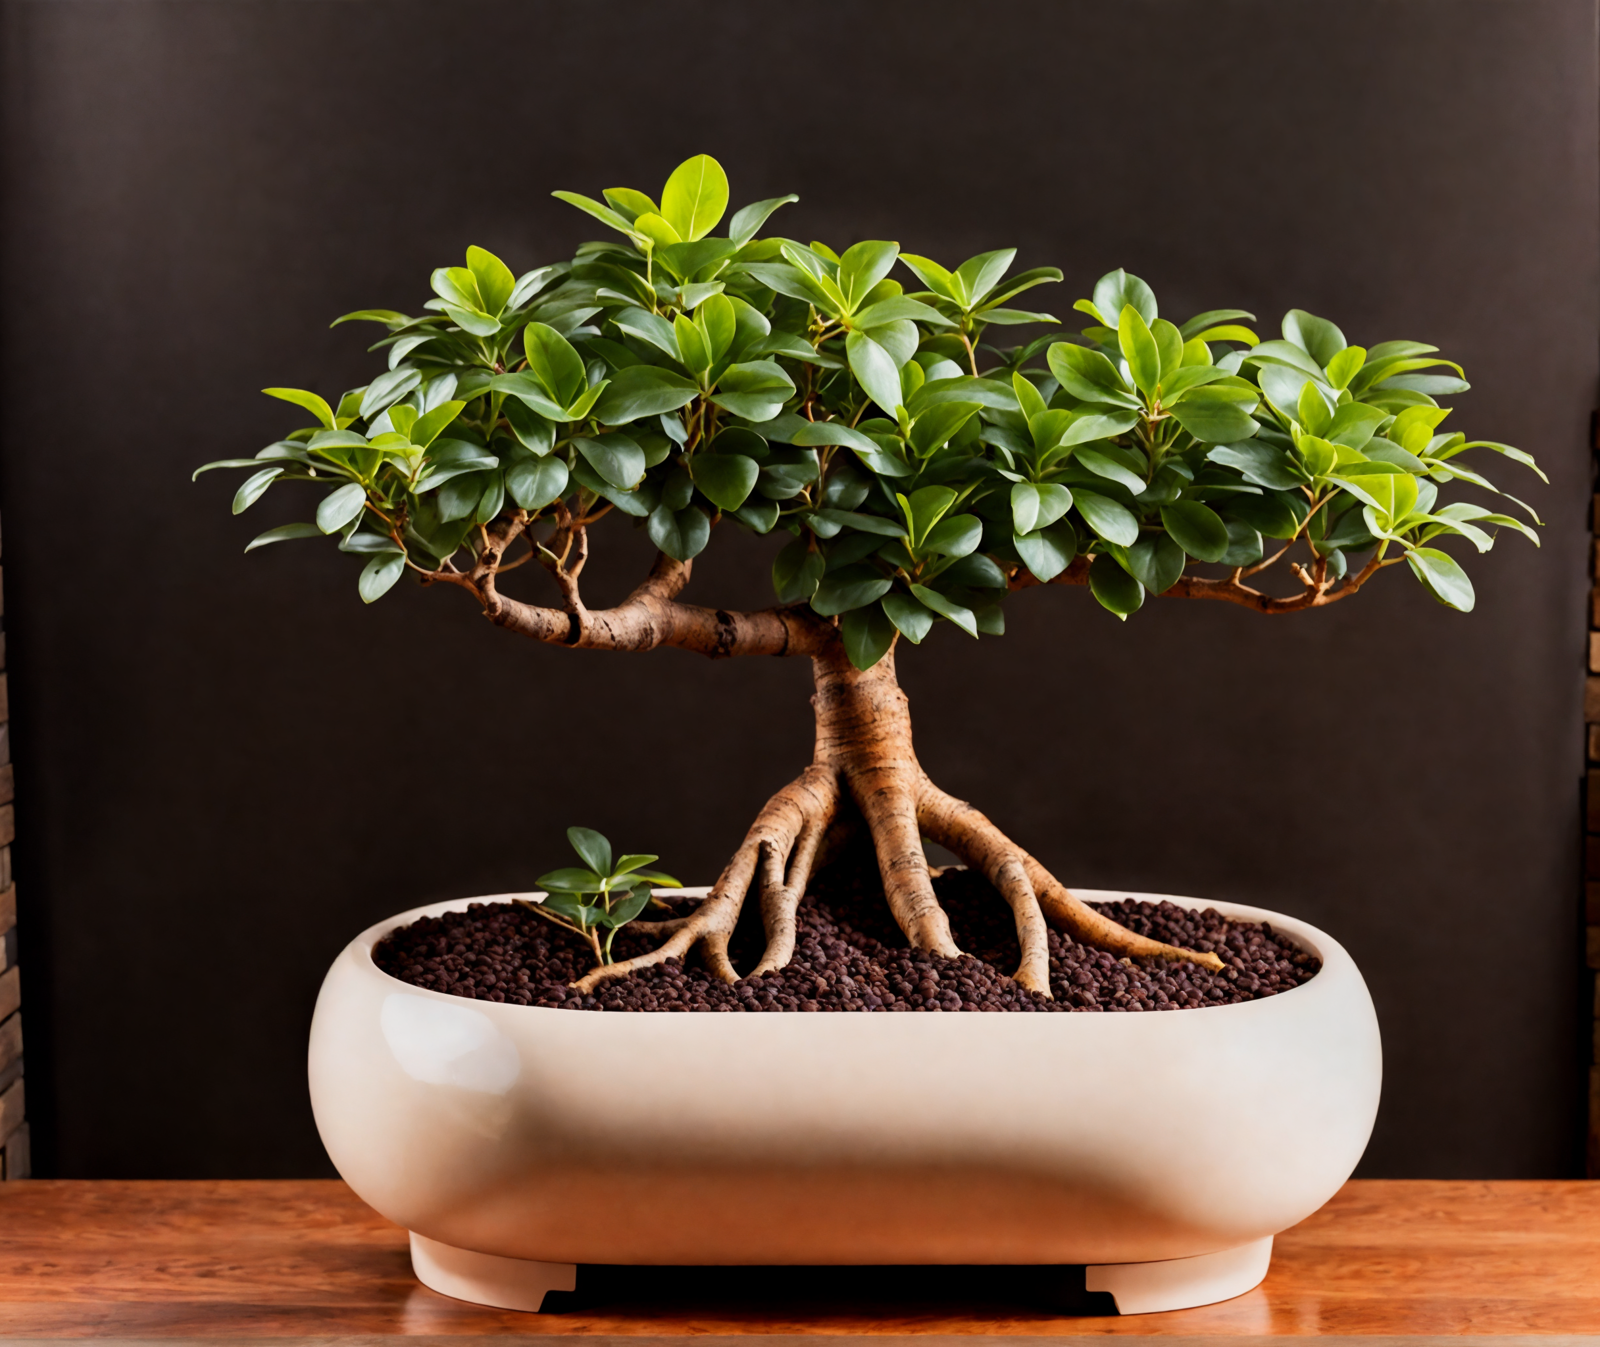 Ficus microcarpa in a white bowl on a wooden table, with clear lighting and a dark background.